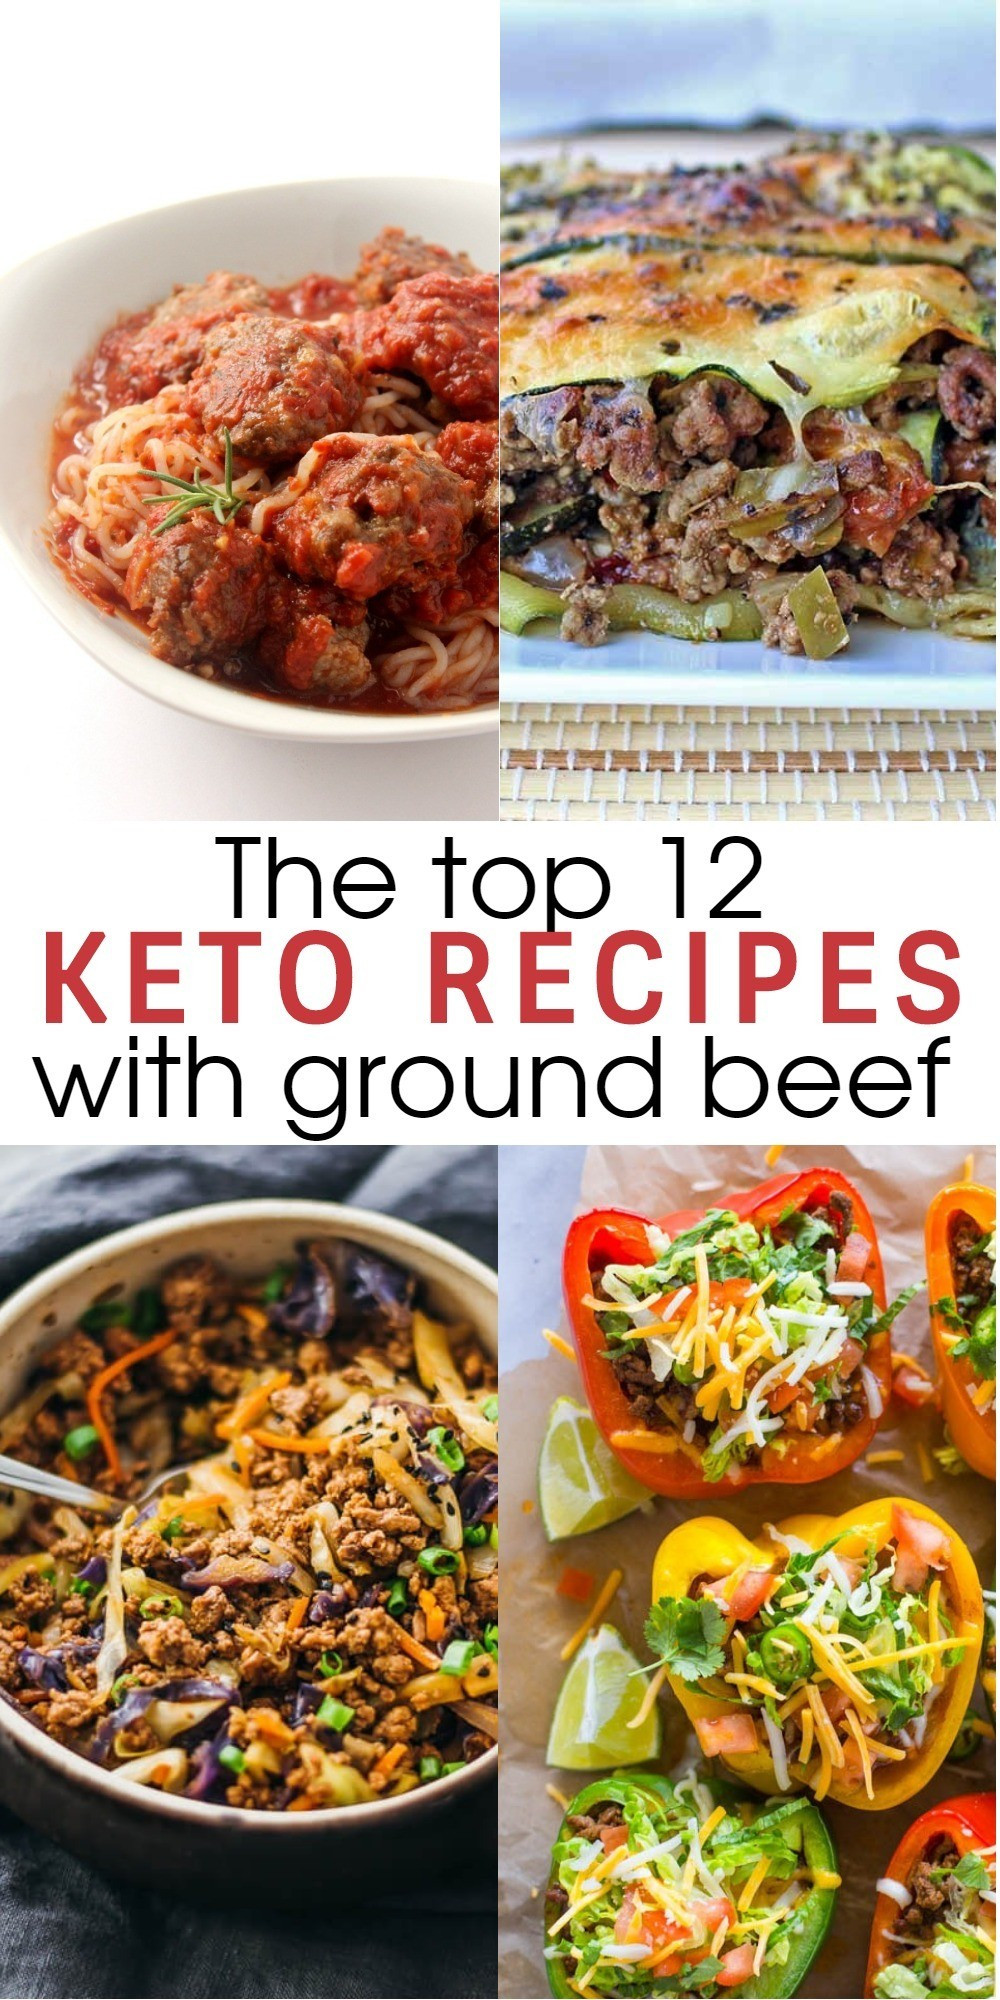 Keto Recipes With Ground Beef
 12 Flavorful and Easy Keto Recipes With Ground Beef To Try